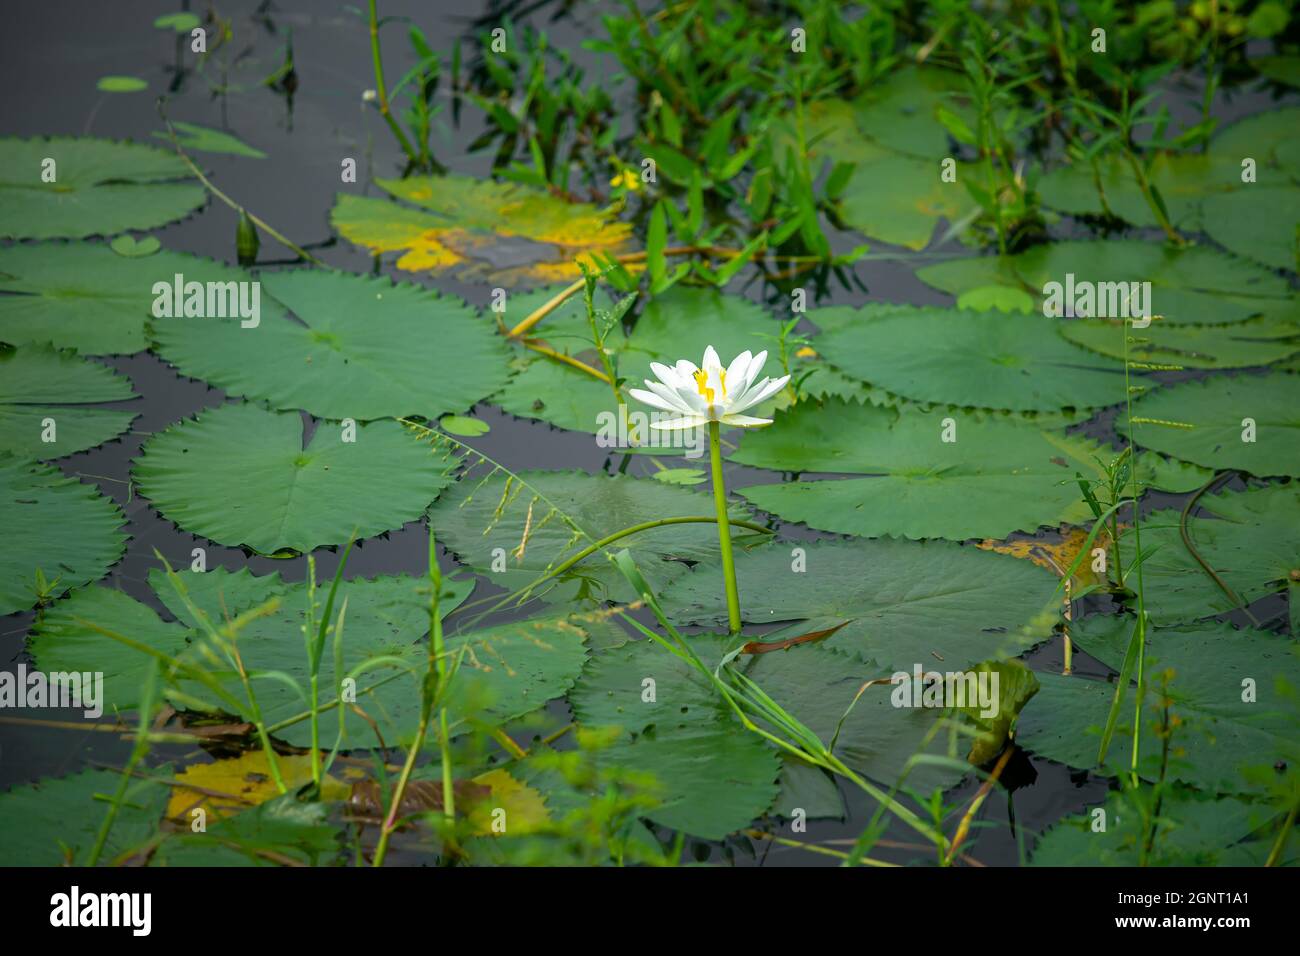 Water Lily (Nymphaeaceae, water lilies, lilly) blooming in pond. Rivers and ponds are filled with white water lilies during the rainy season. The nati Stock Photo